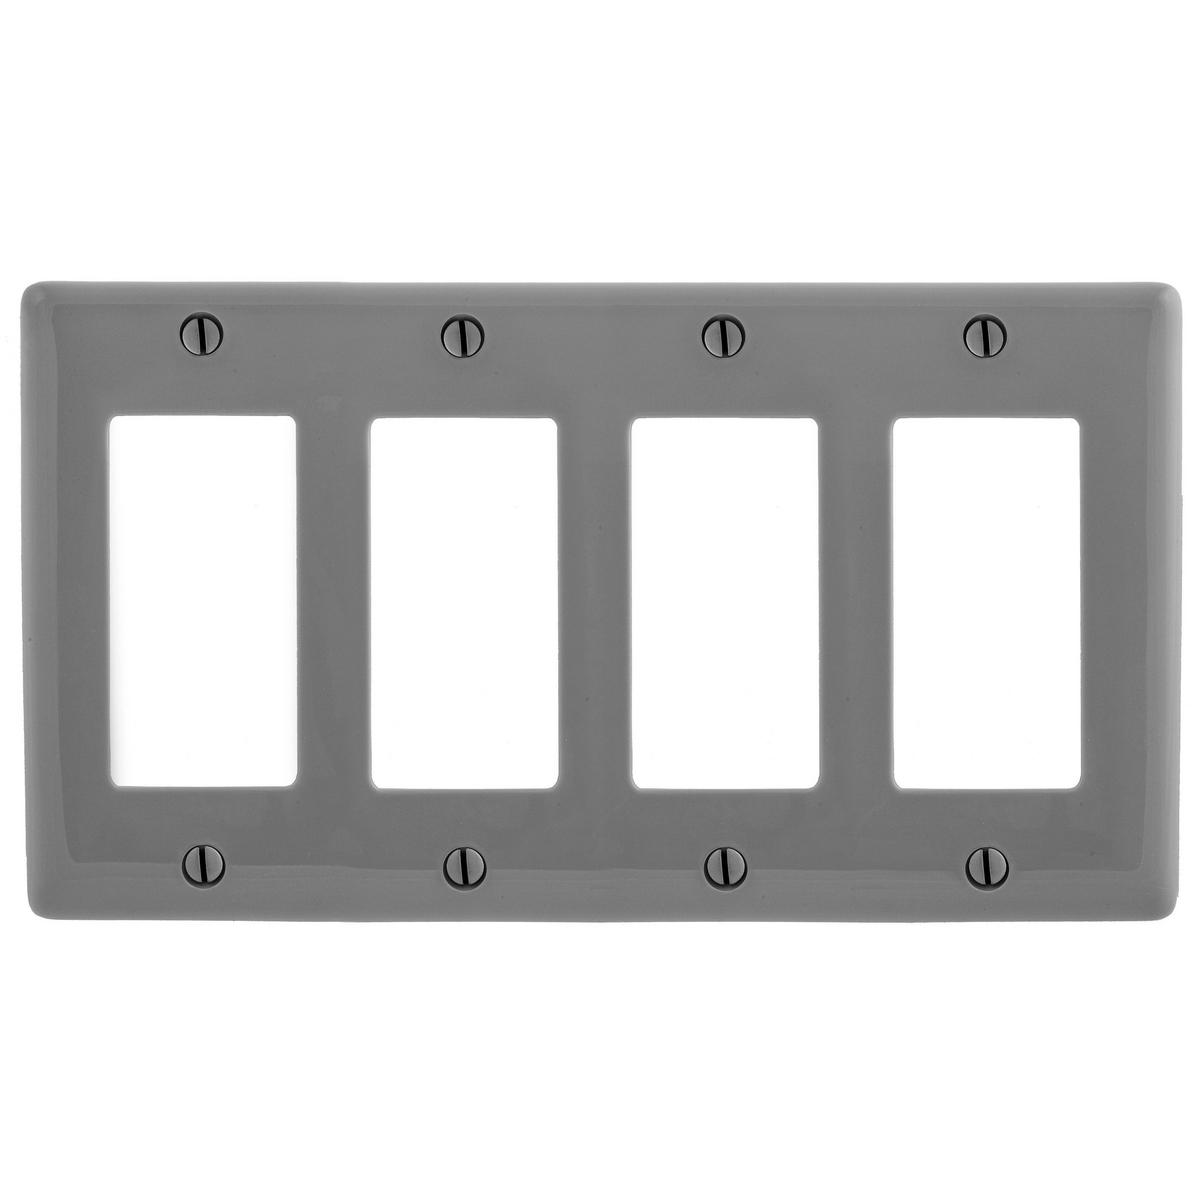 Hubbell NPJ264GY Wallplates, Nylon, Mid-Sized, 2-Gang, 2) Decorator, Gray  ; Reinforcement ribs for extra strength ; Curved corners for improved aesthetics ; High-impact, self-extinguishing nylon material ; Standard Size is 1/8" larger to give you extra coverage to hide r